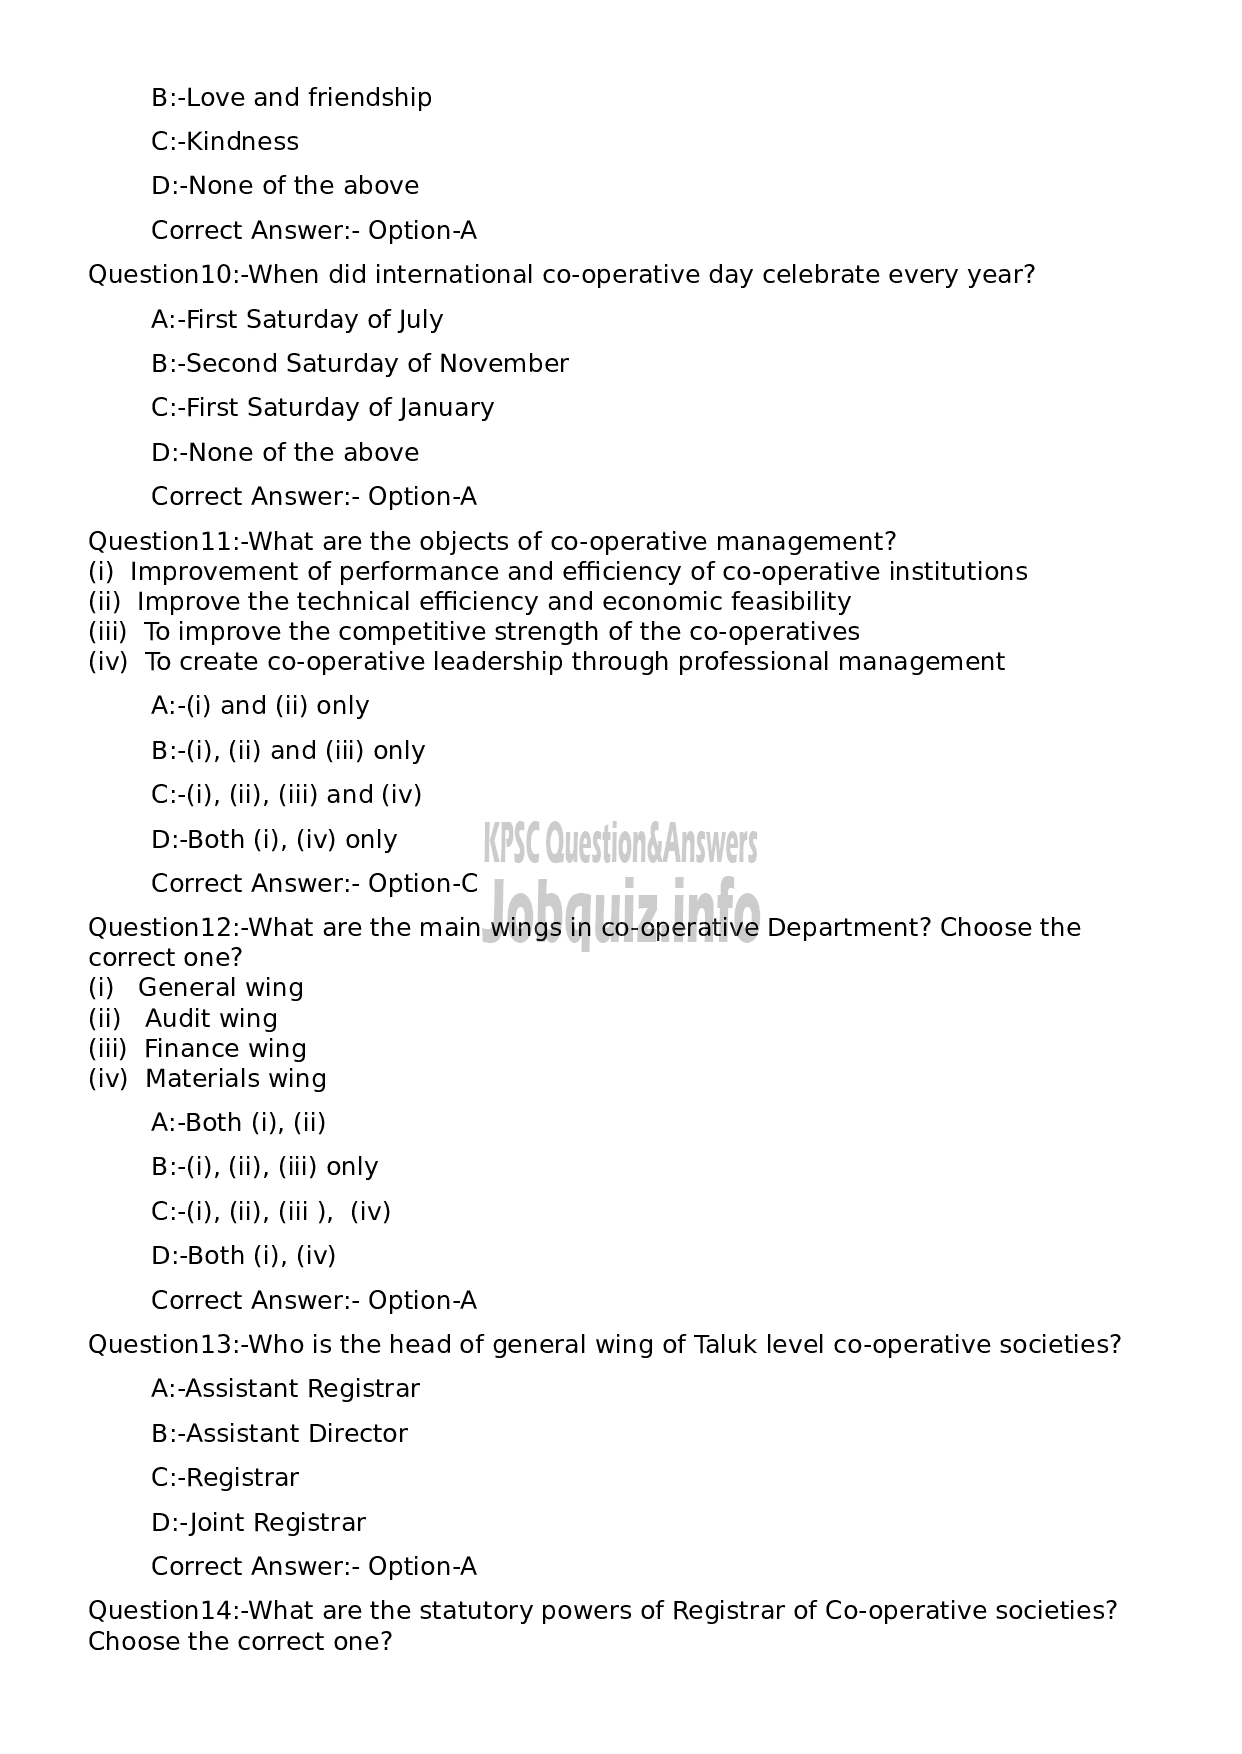 Kerala PSC Question Paper - Manager Grade II (Society Category) (NCA- E/T/B)-3